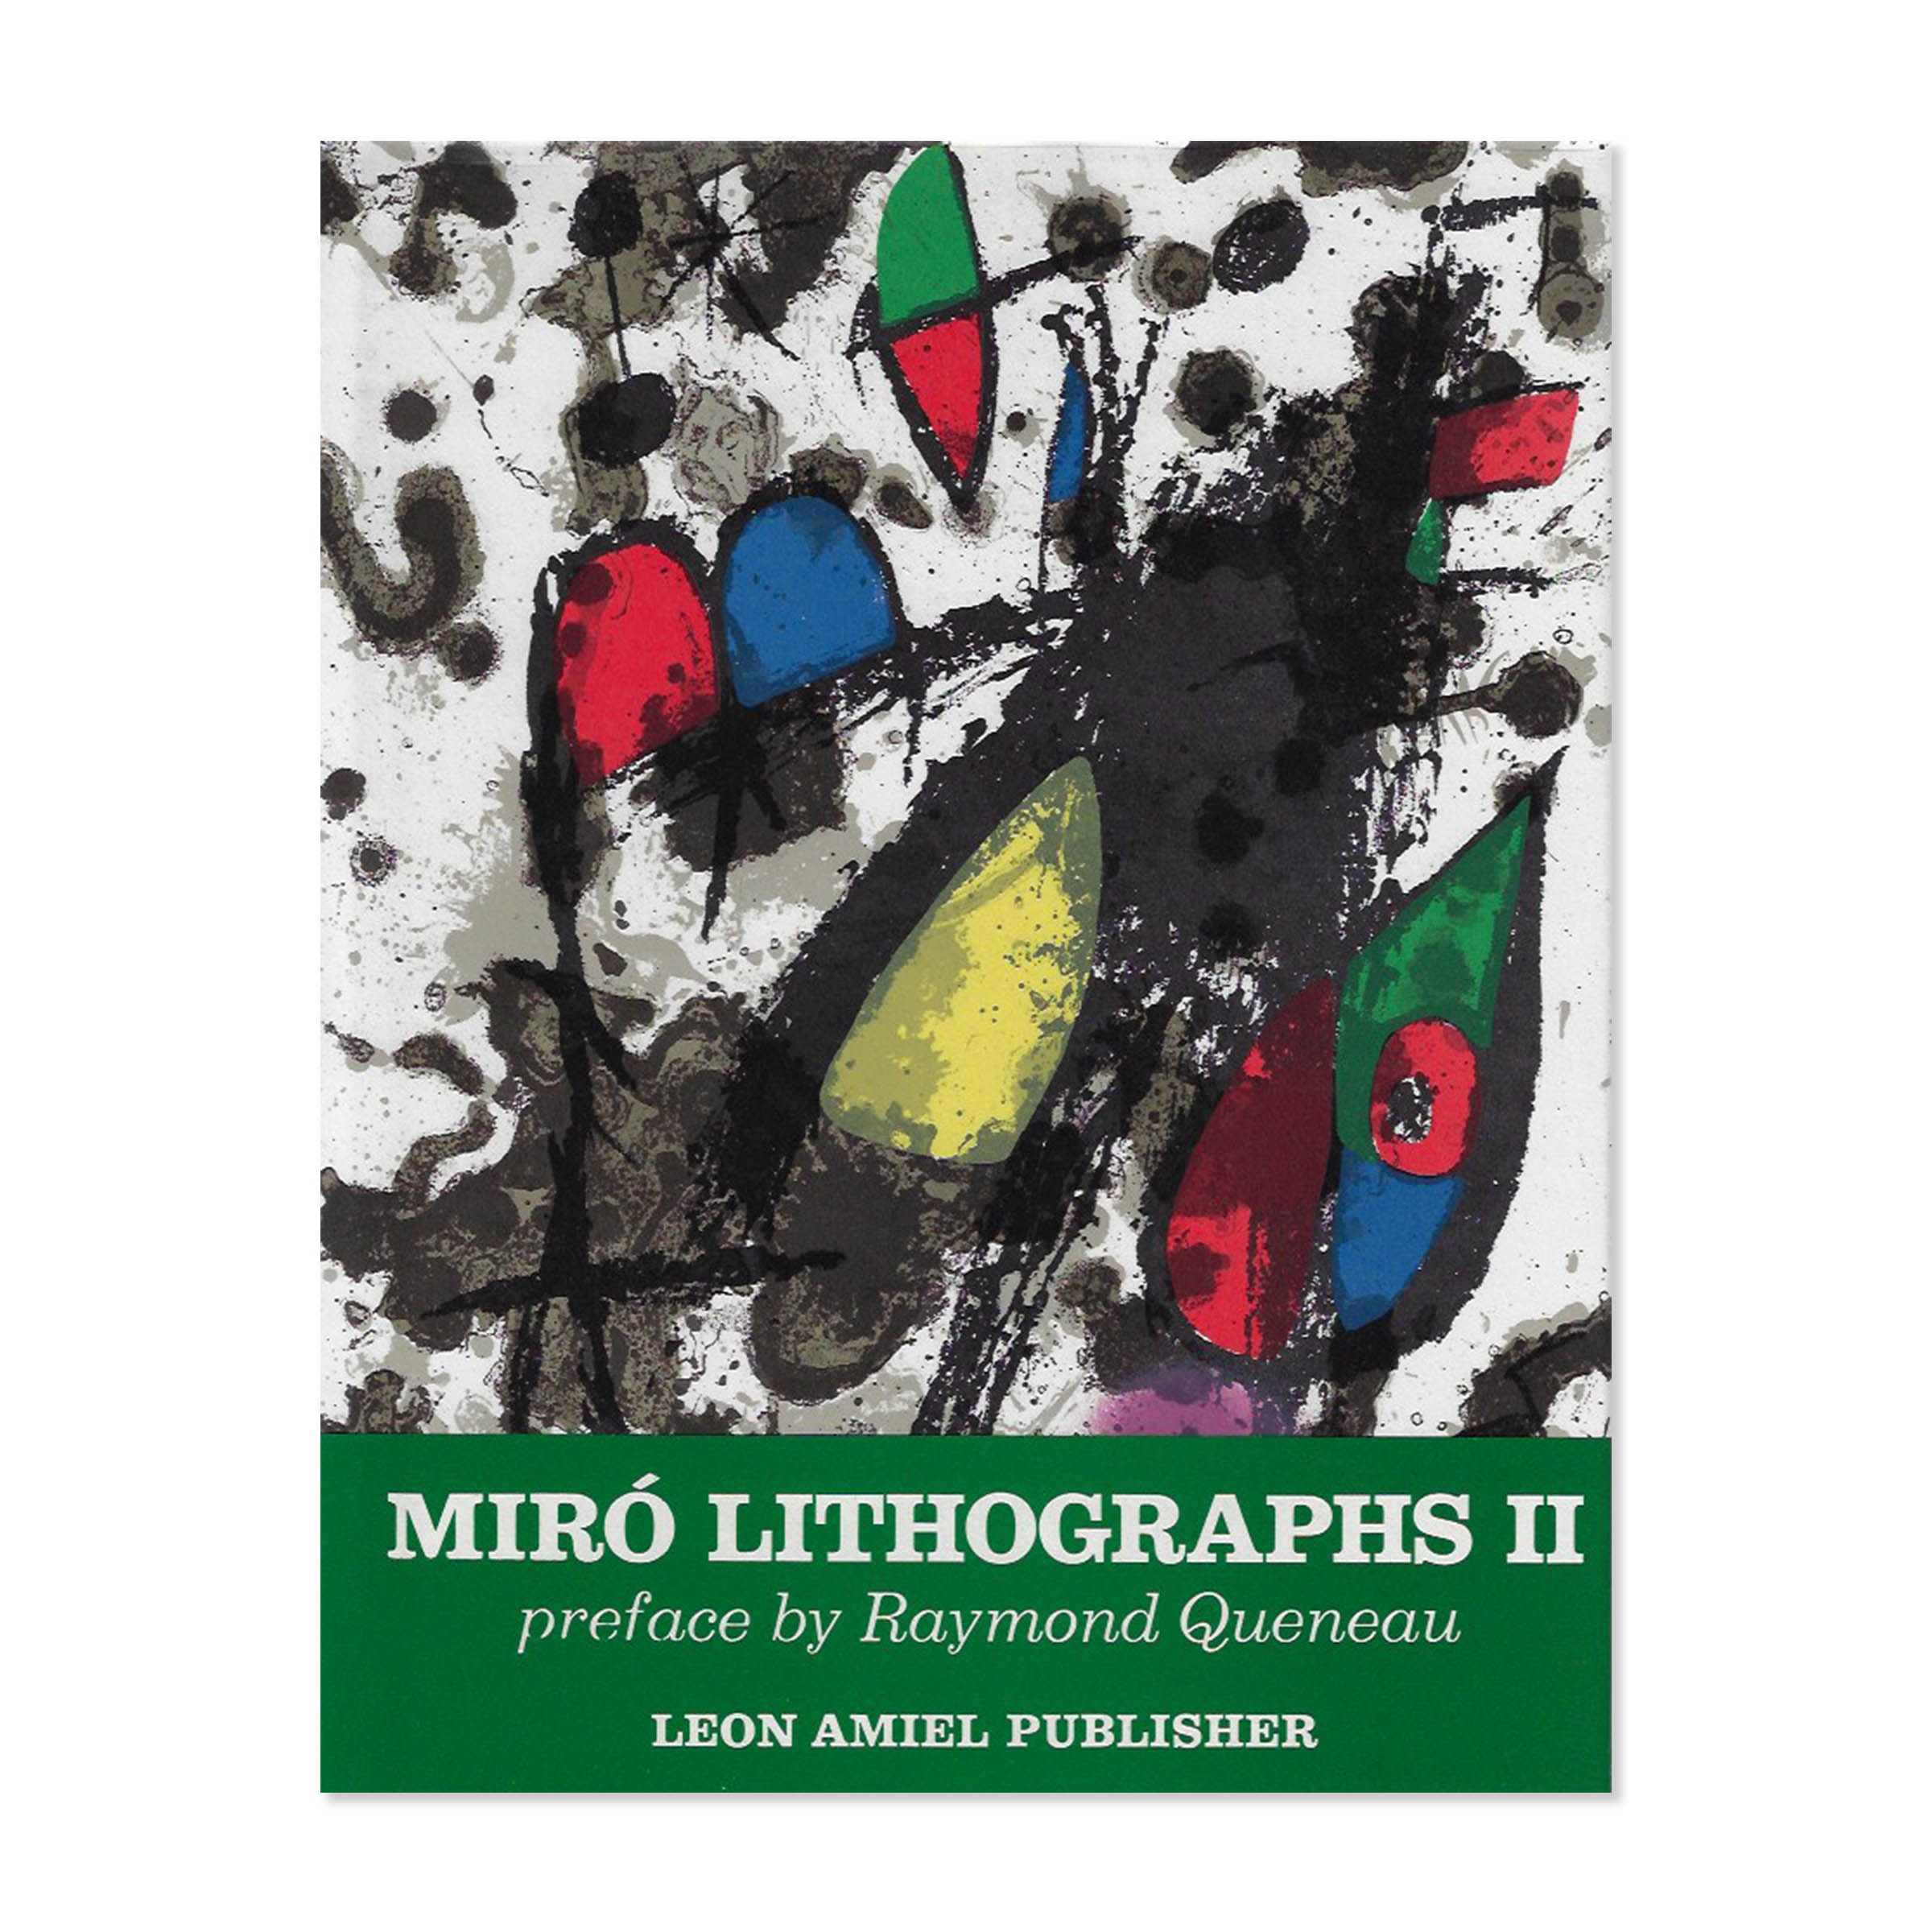 Miro Lithographs. Cover view